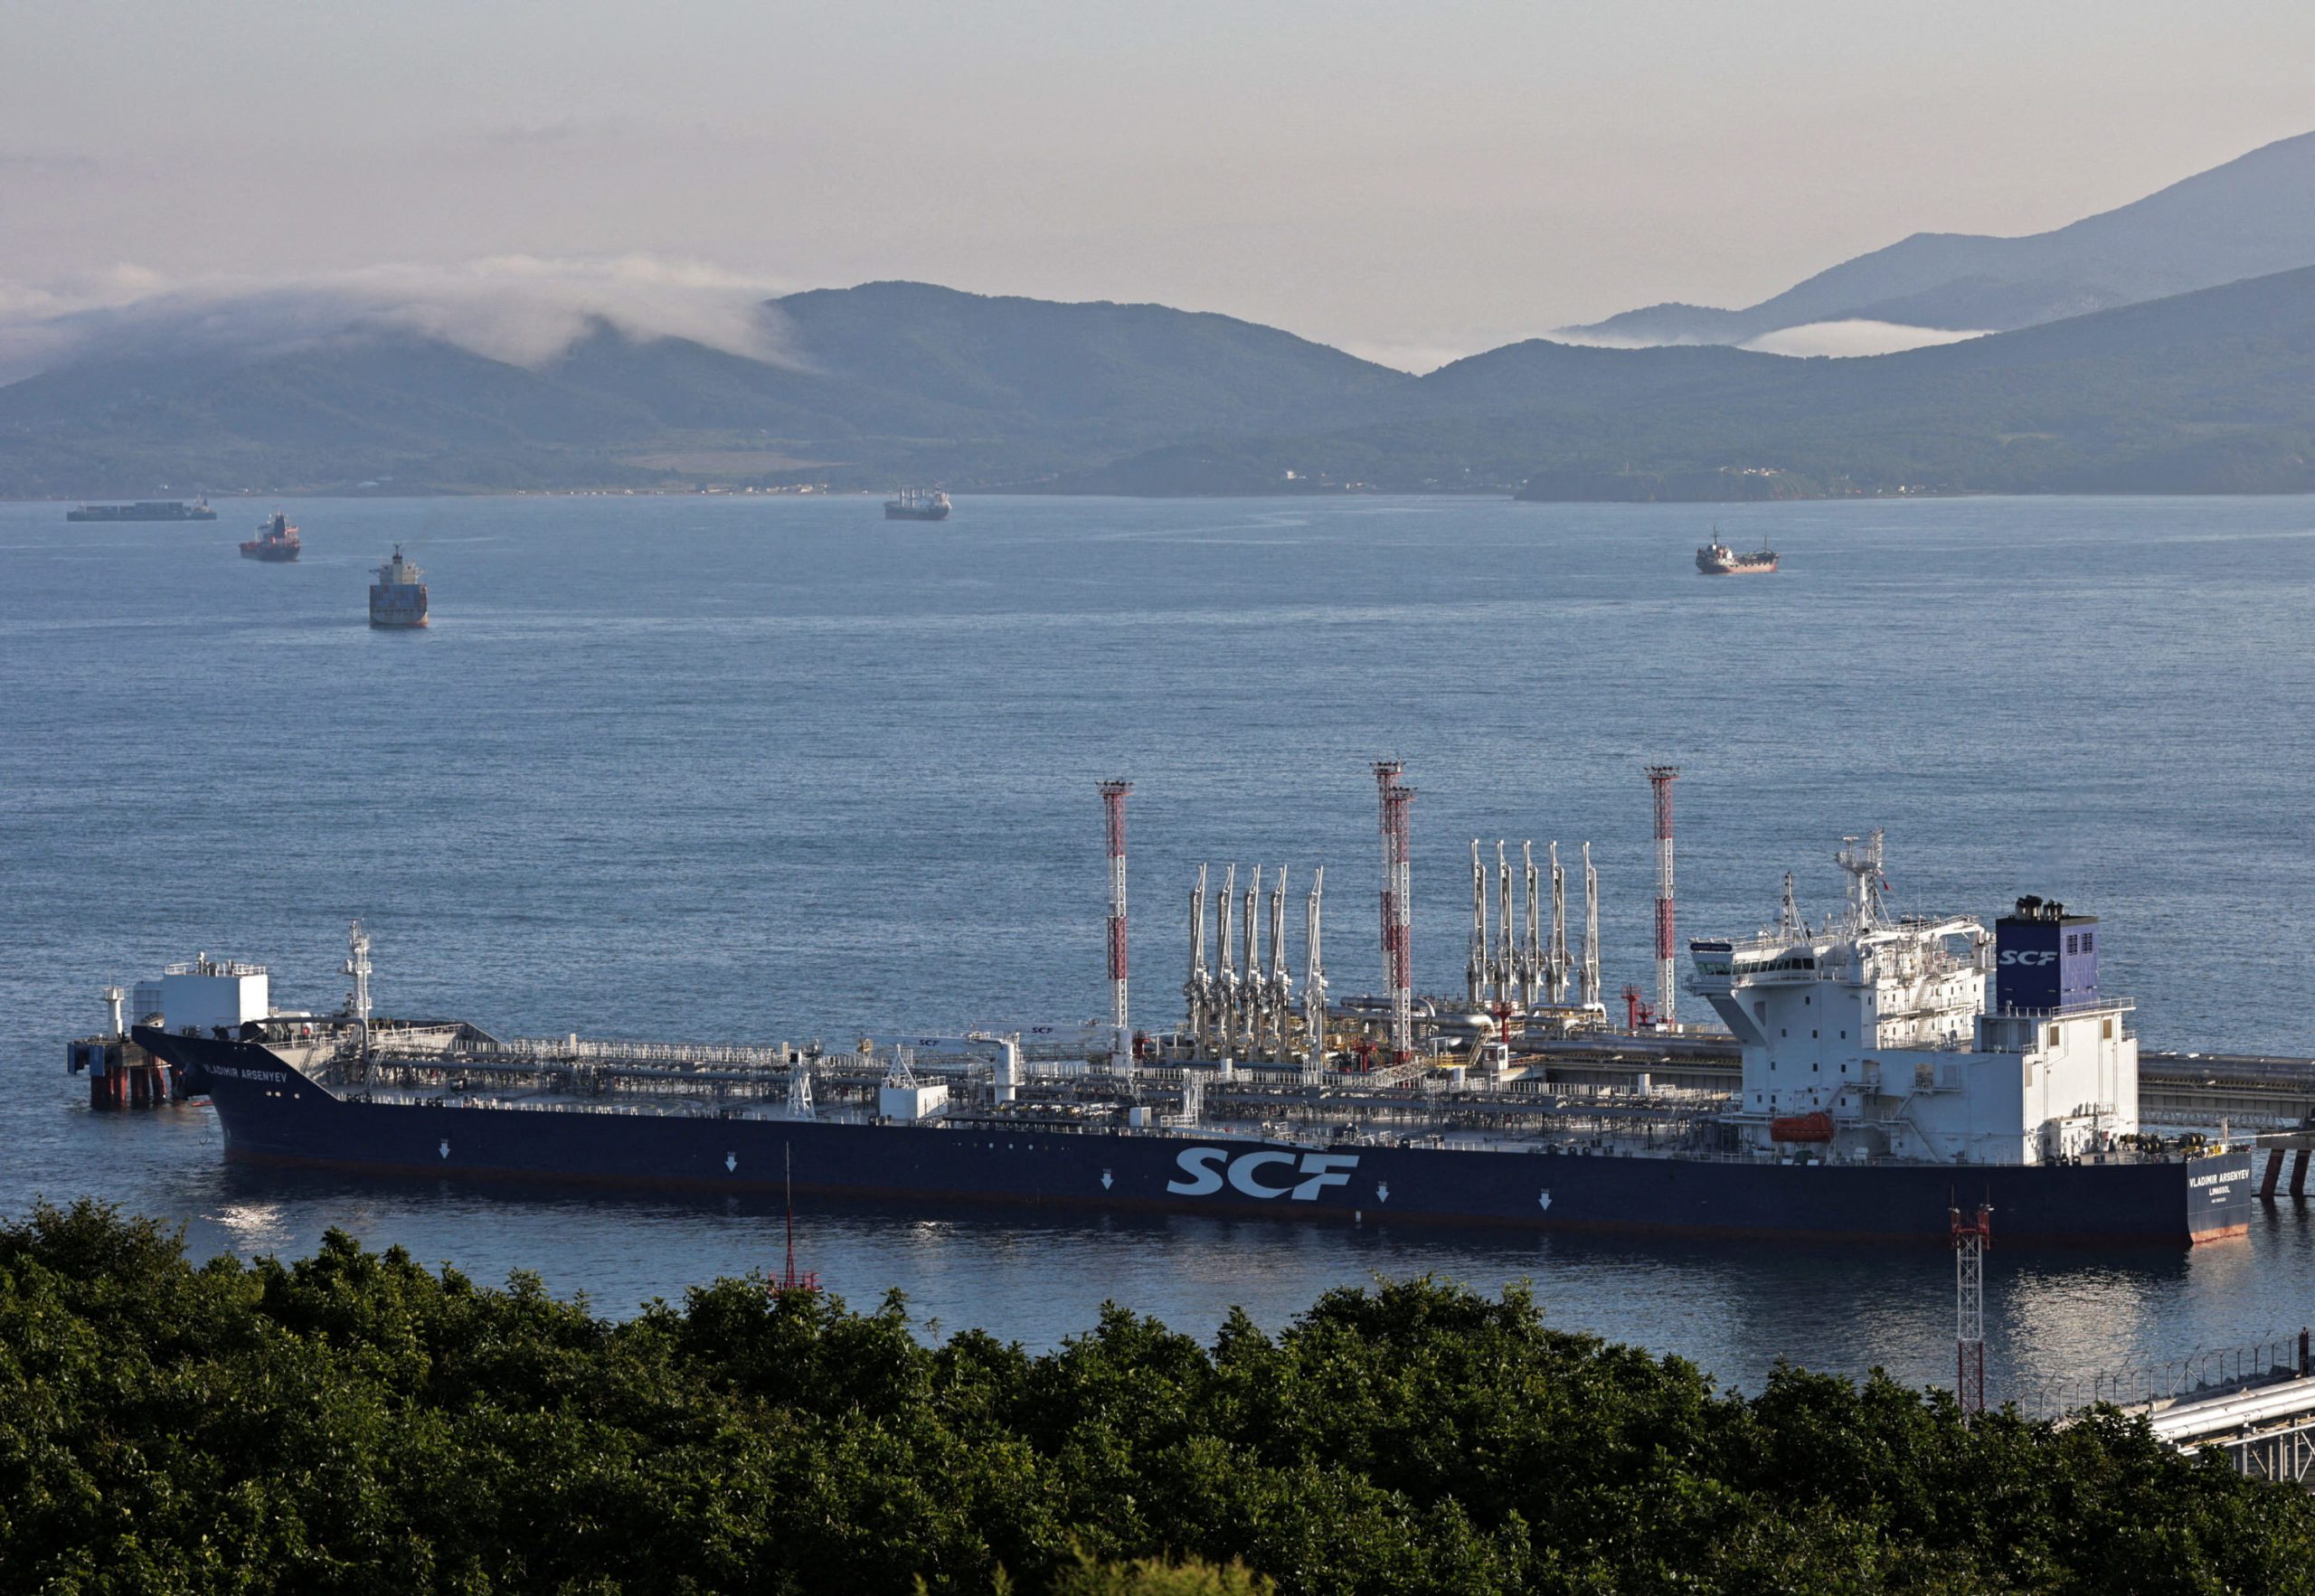 An aerial view shows an SCF tanker at the crude oil terminal Kozmino on the shore of Nakhodka Bay near the port city of Nakhodka, Russia August 12, 2022